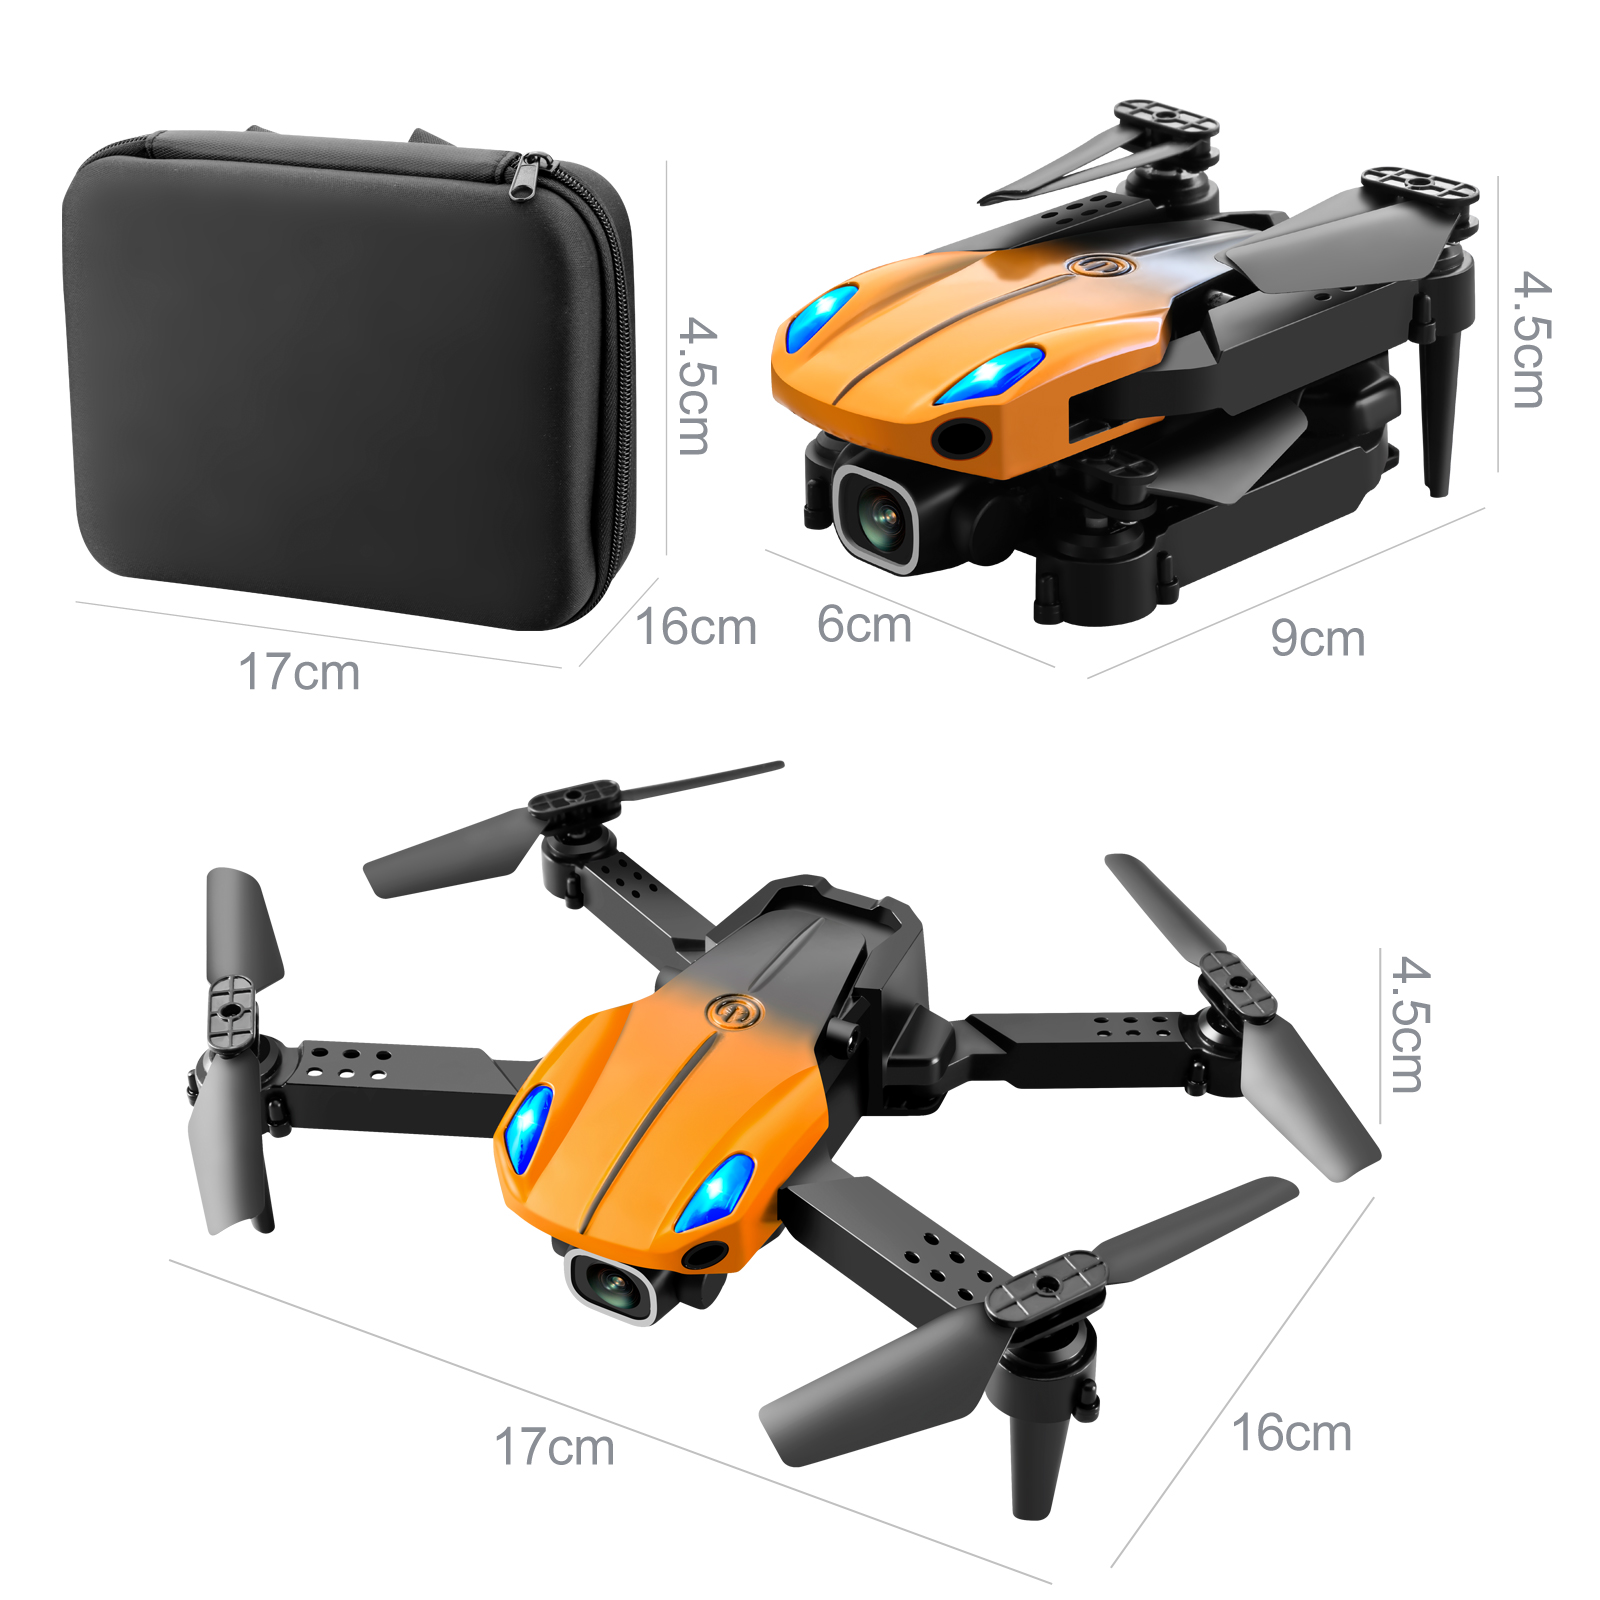 KY907-PRO-Mini-Wifi-FPV-with-4K-HD-Camera-Three-side-Obstacle-Avoidance-Headless-Mode-RC-Drone-Quadc-1906185-20